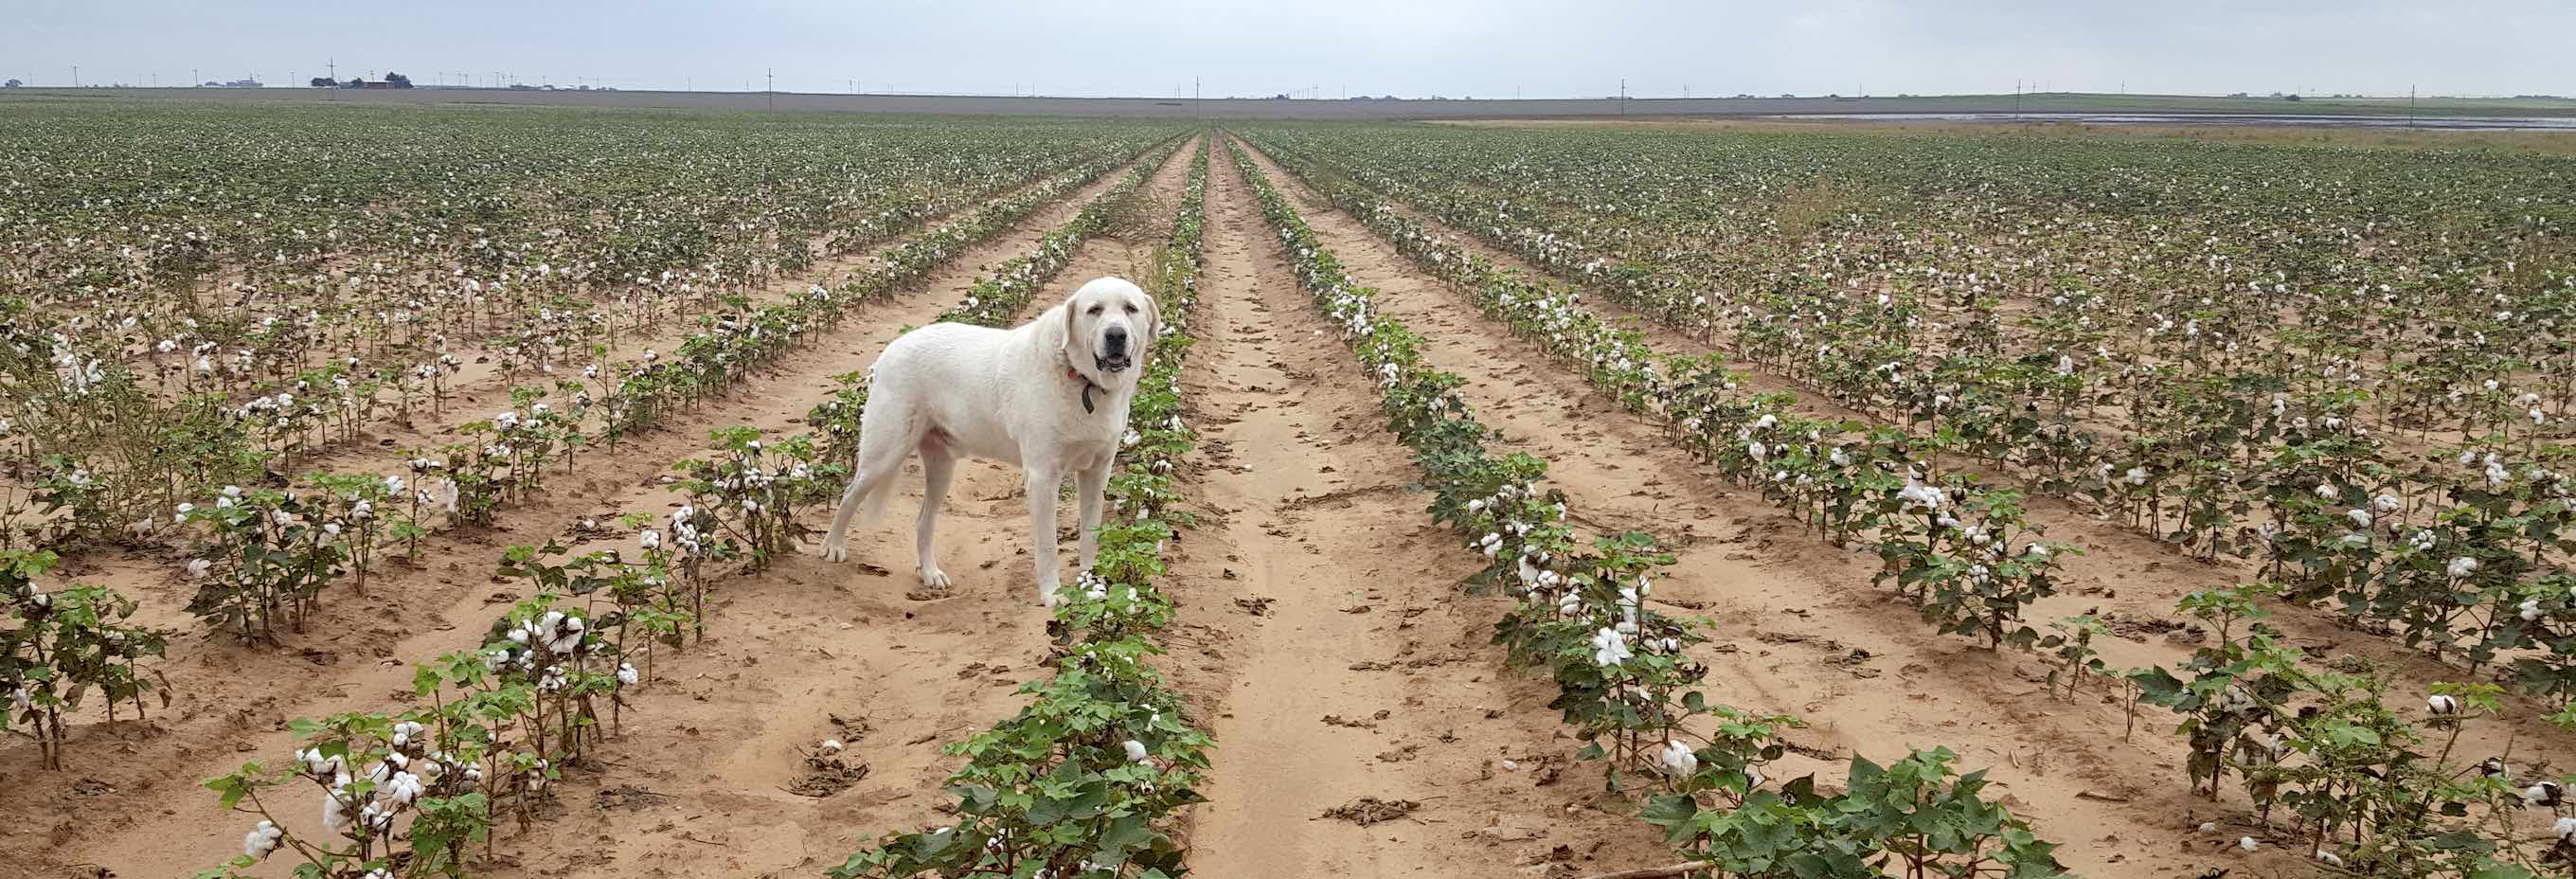 Cotton Field with dog